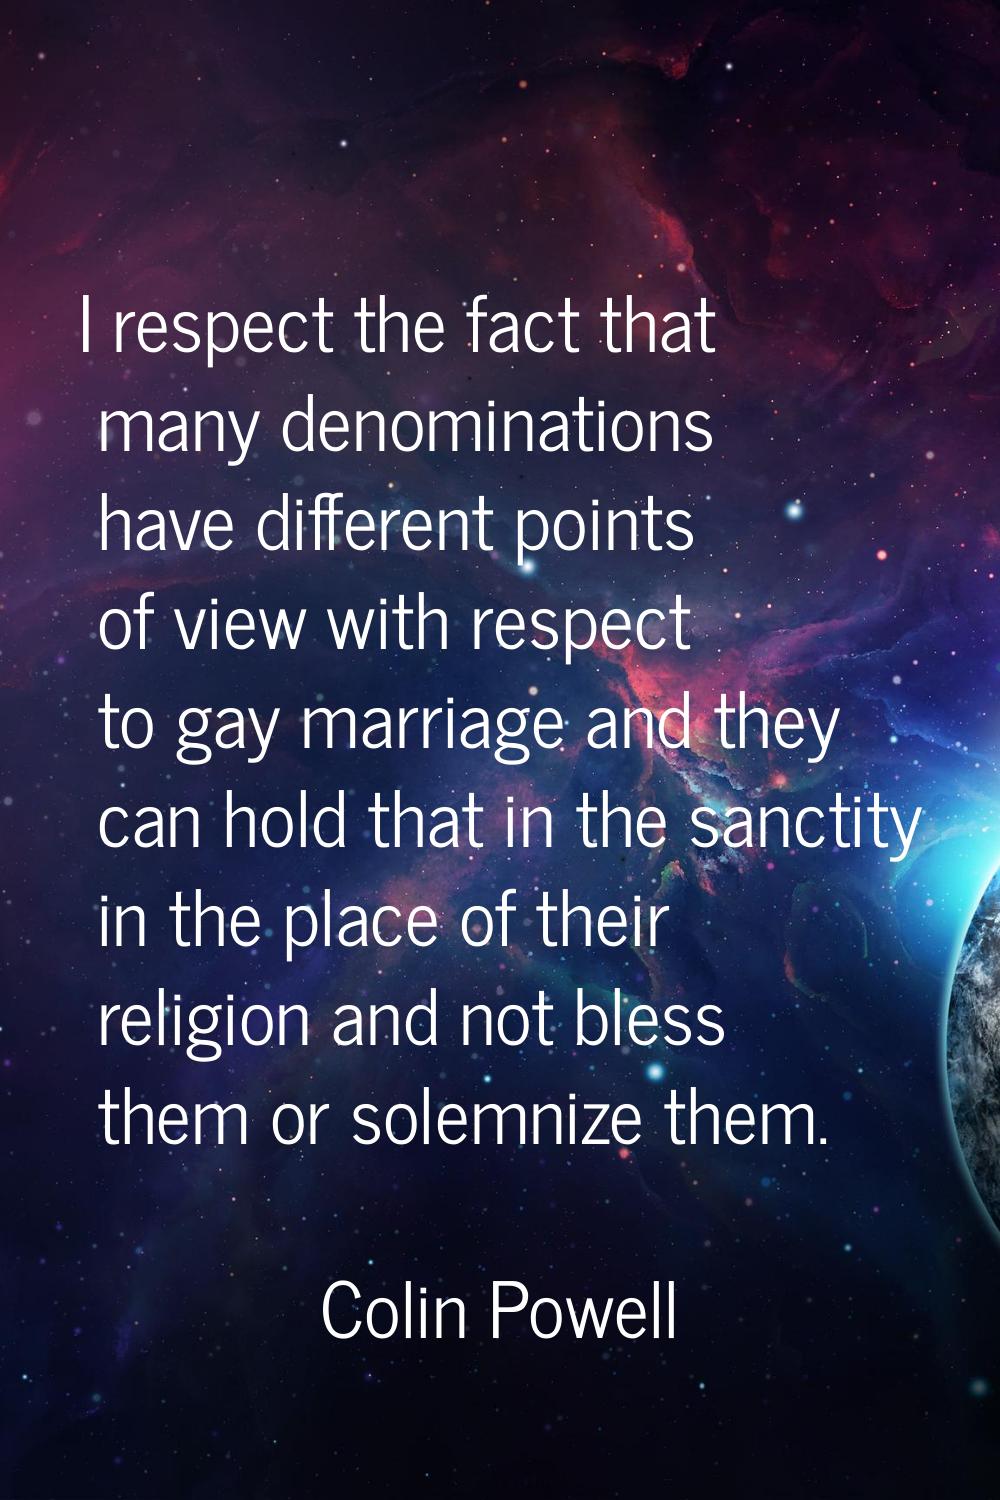 I respect the fact that many denominations have different points of view with respect to gay marria